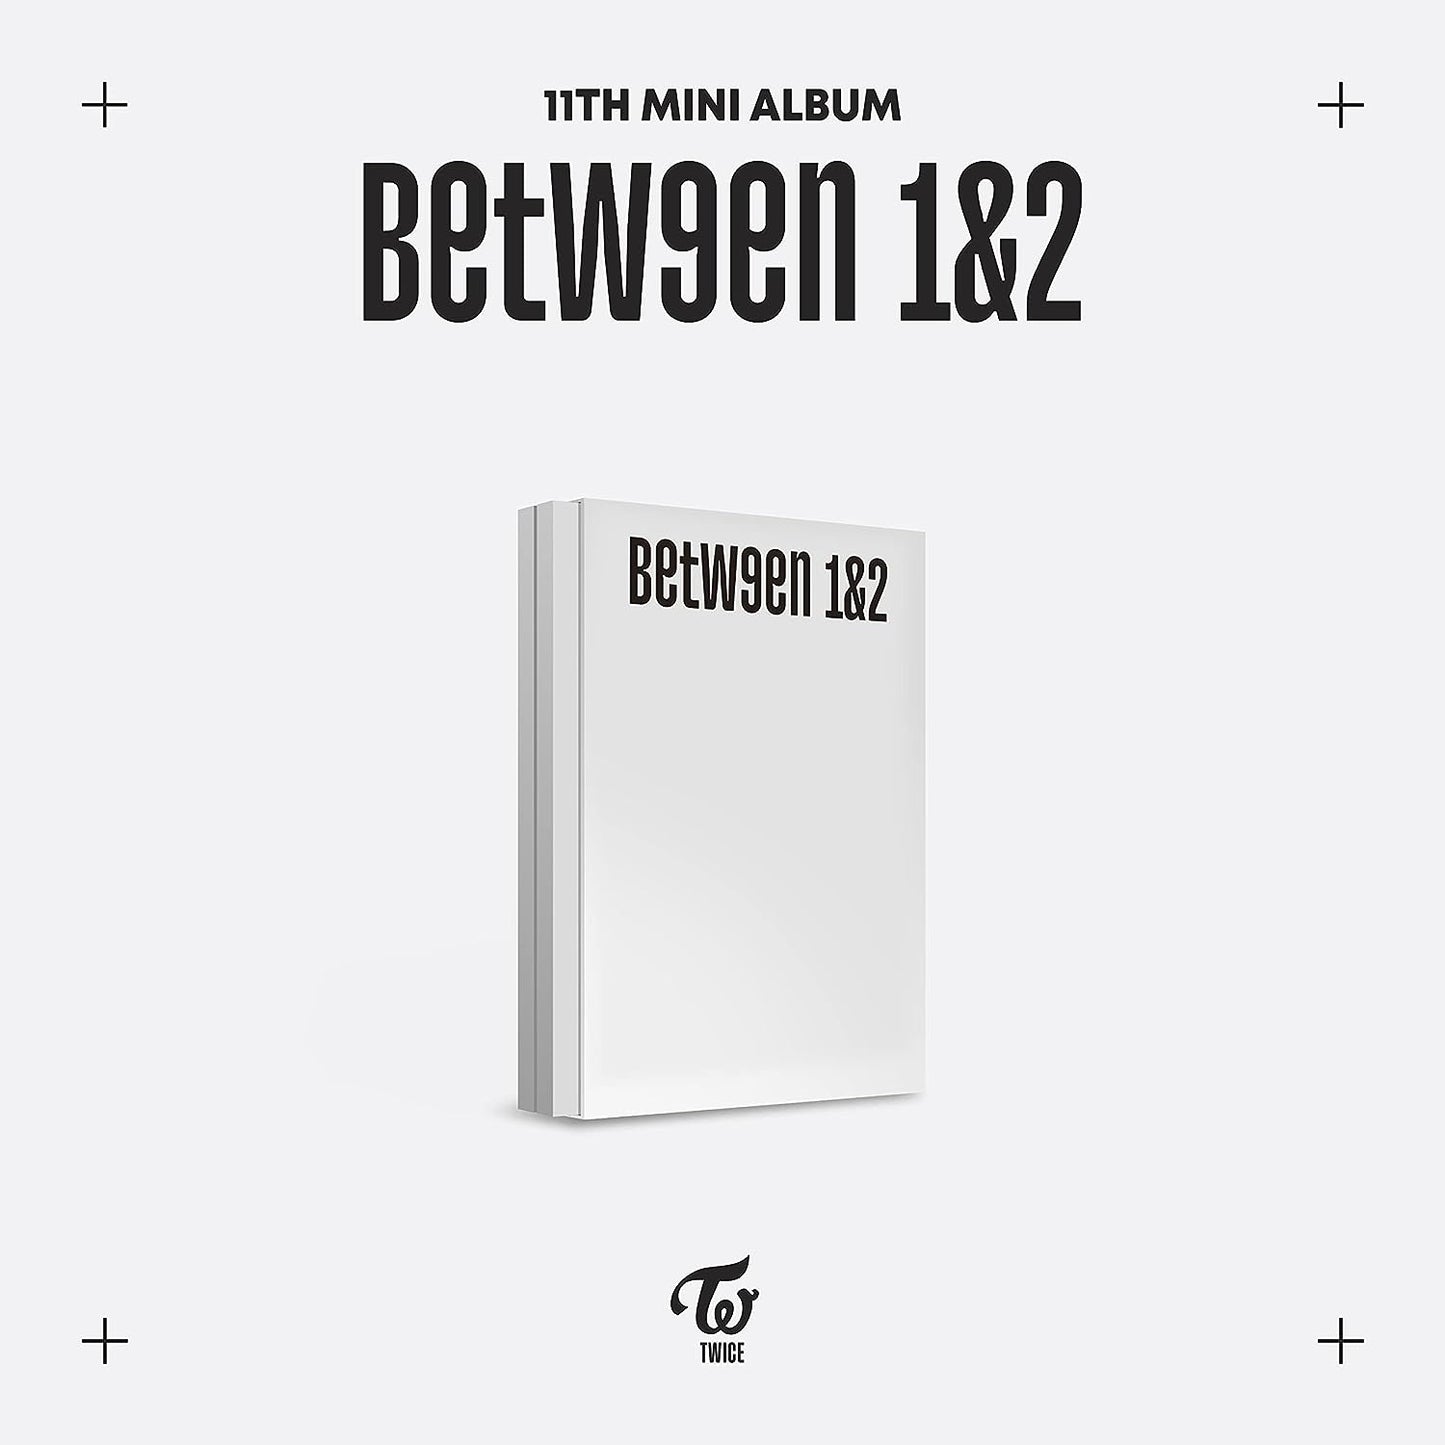 TWICE 11TH MINI ALBUM 'BETWEEN 1&2' CRYPTOGRAPHY VERSION COVER